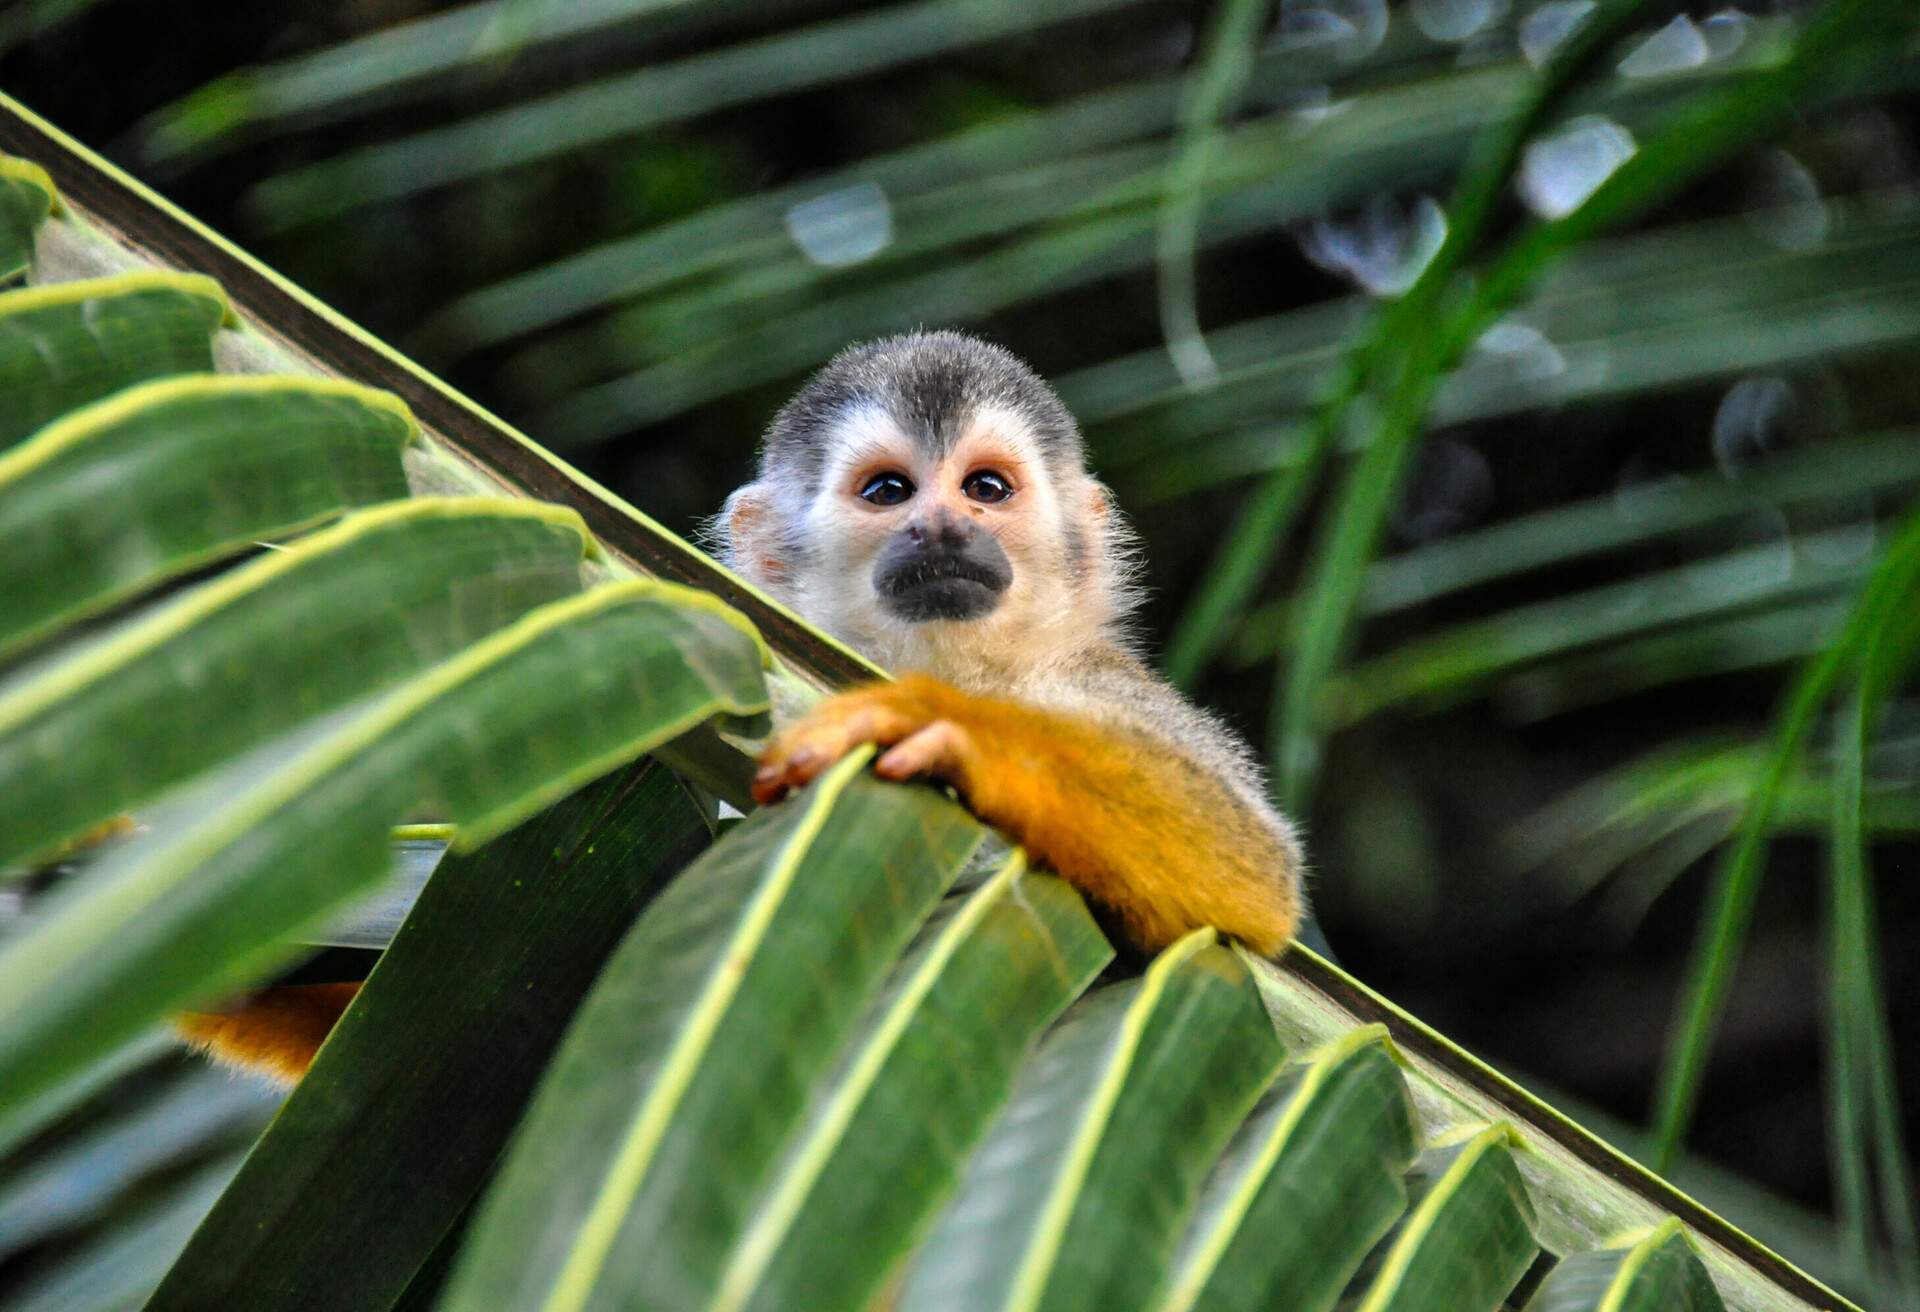 Squirrel Monkey hanging on palm leaf in Costa Rica, Central America.